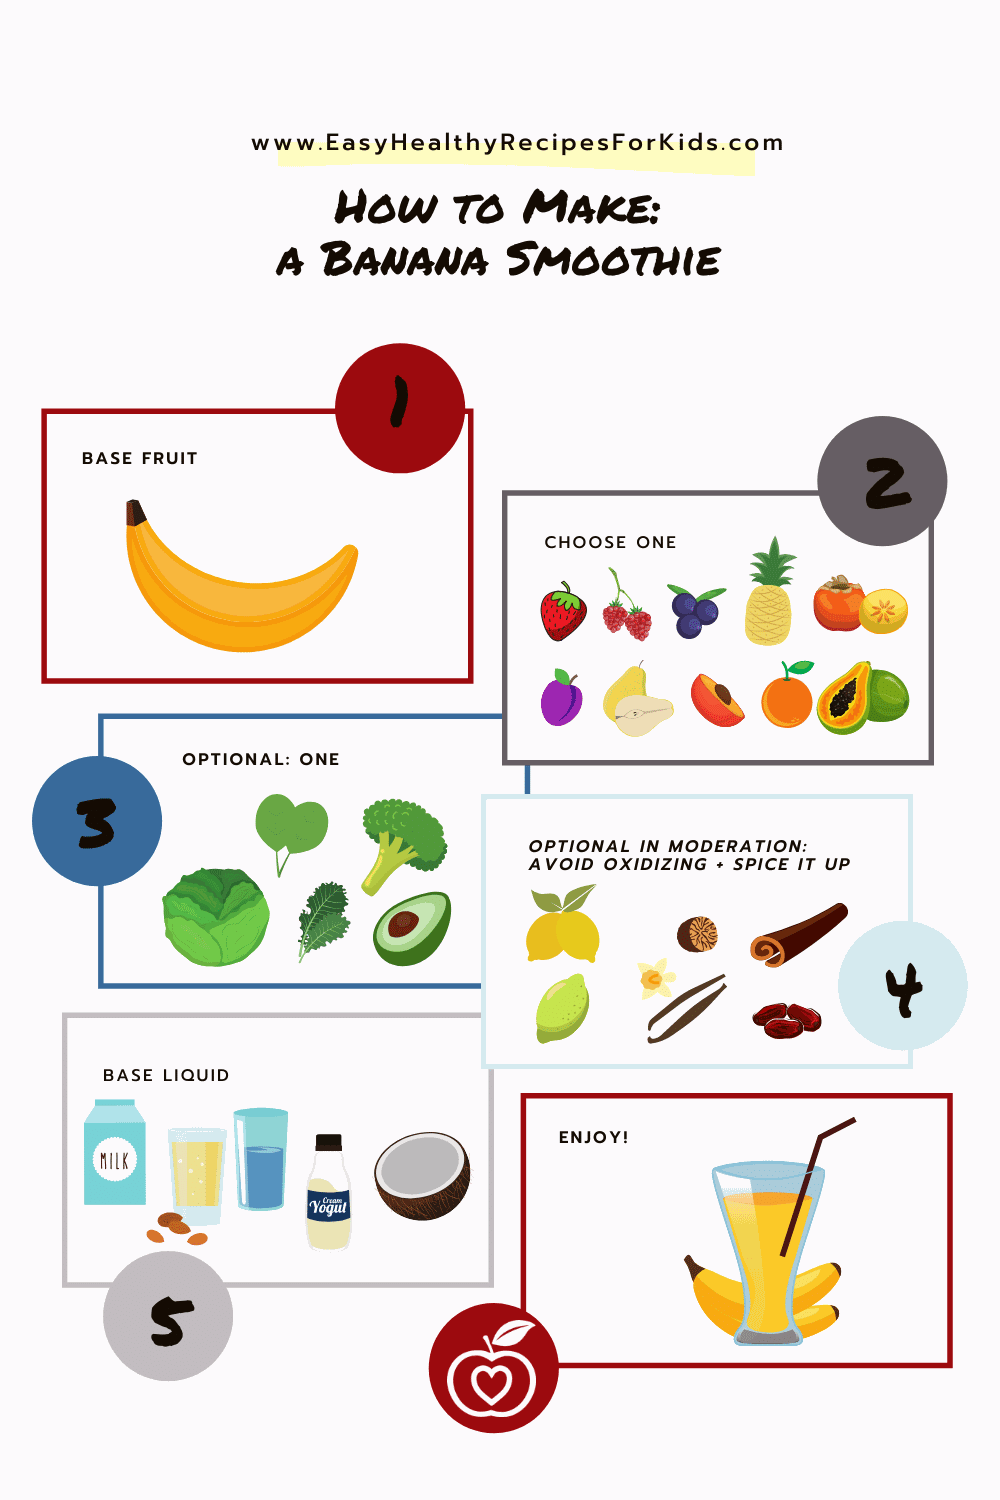 https://www.easy-healthy-recipes-for-kids.com/images/xP-EHRFK-Infographic-smoothie.png.pagespeed.ic.S-7wWz1UYH.png